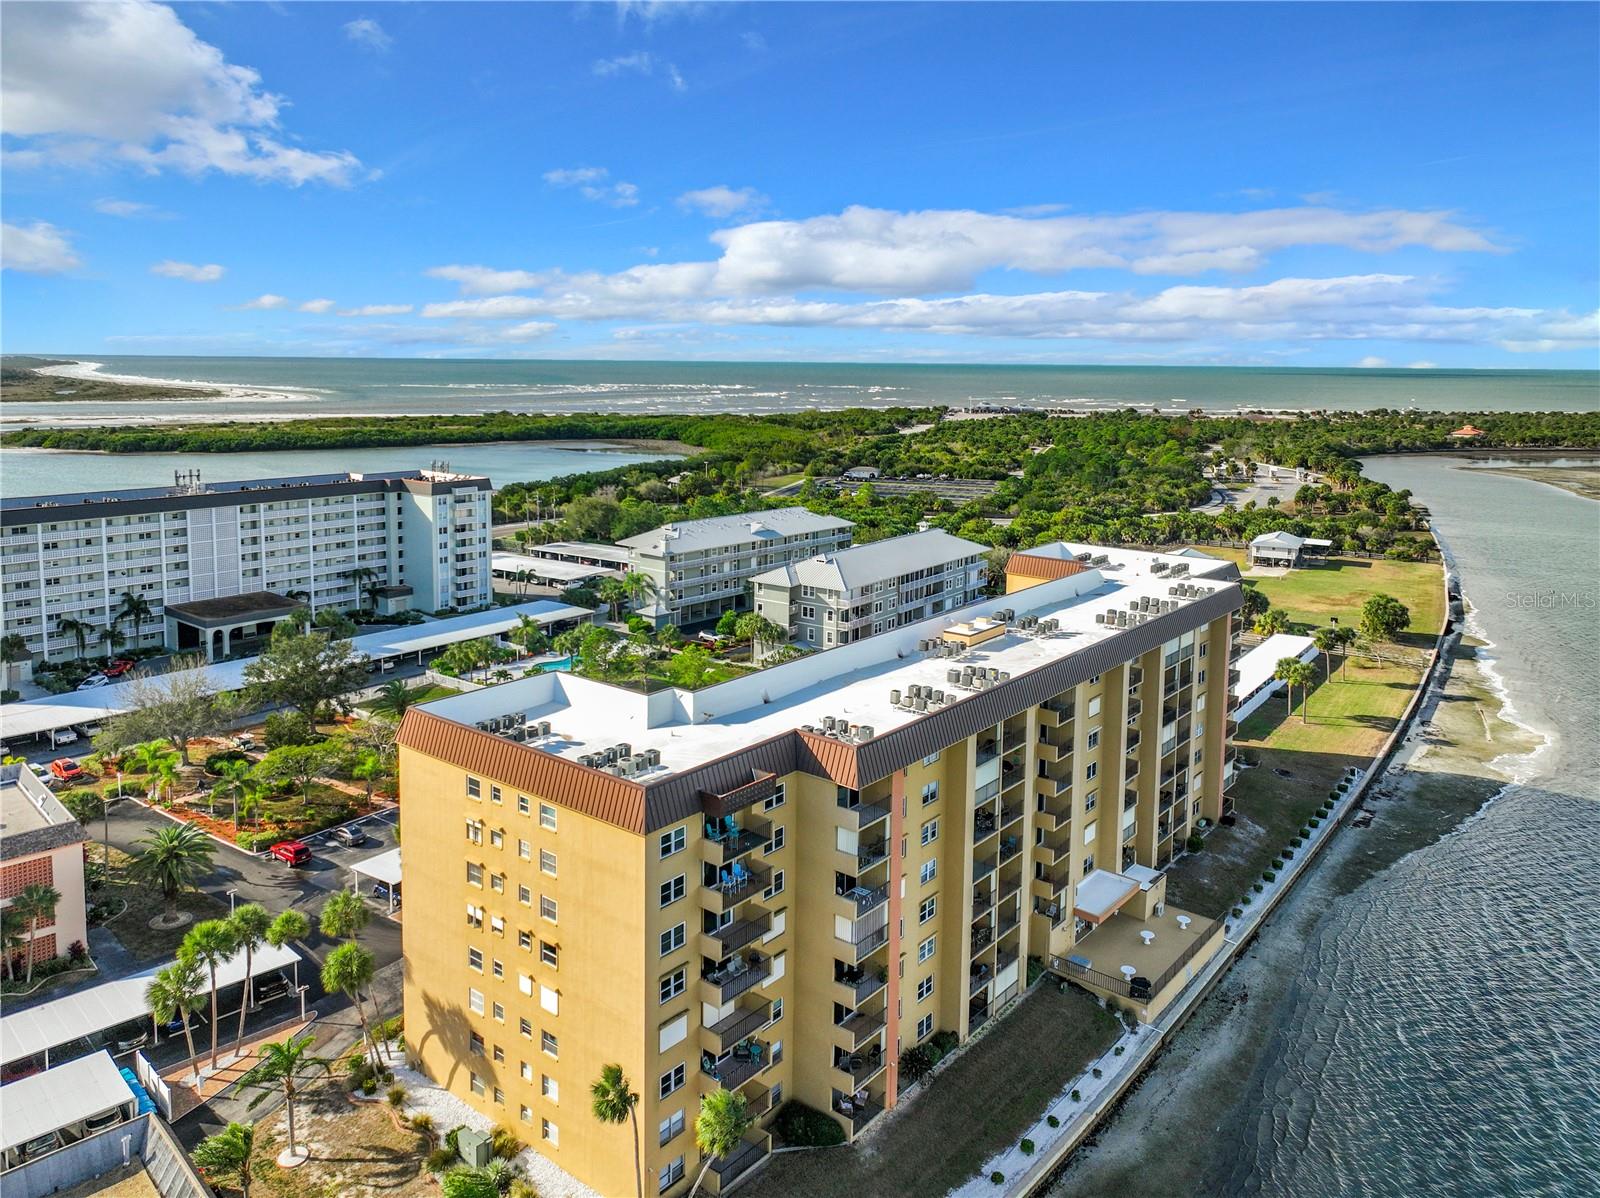 Aerial view of rear of buidling with Honeymoon Island in the distance